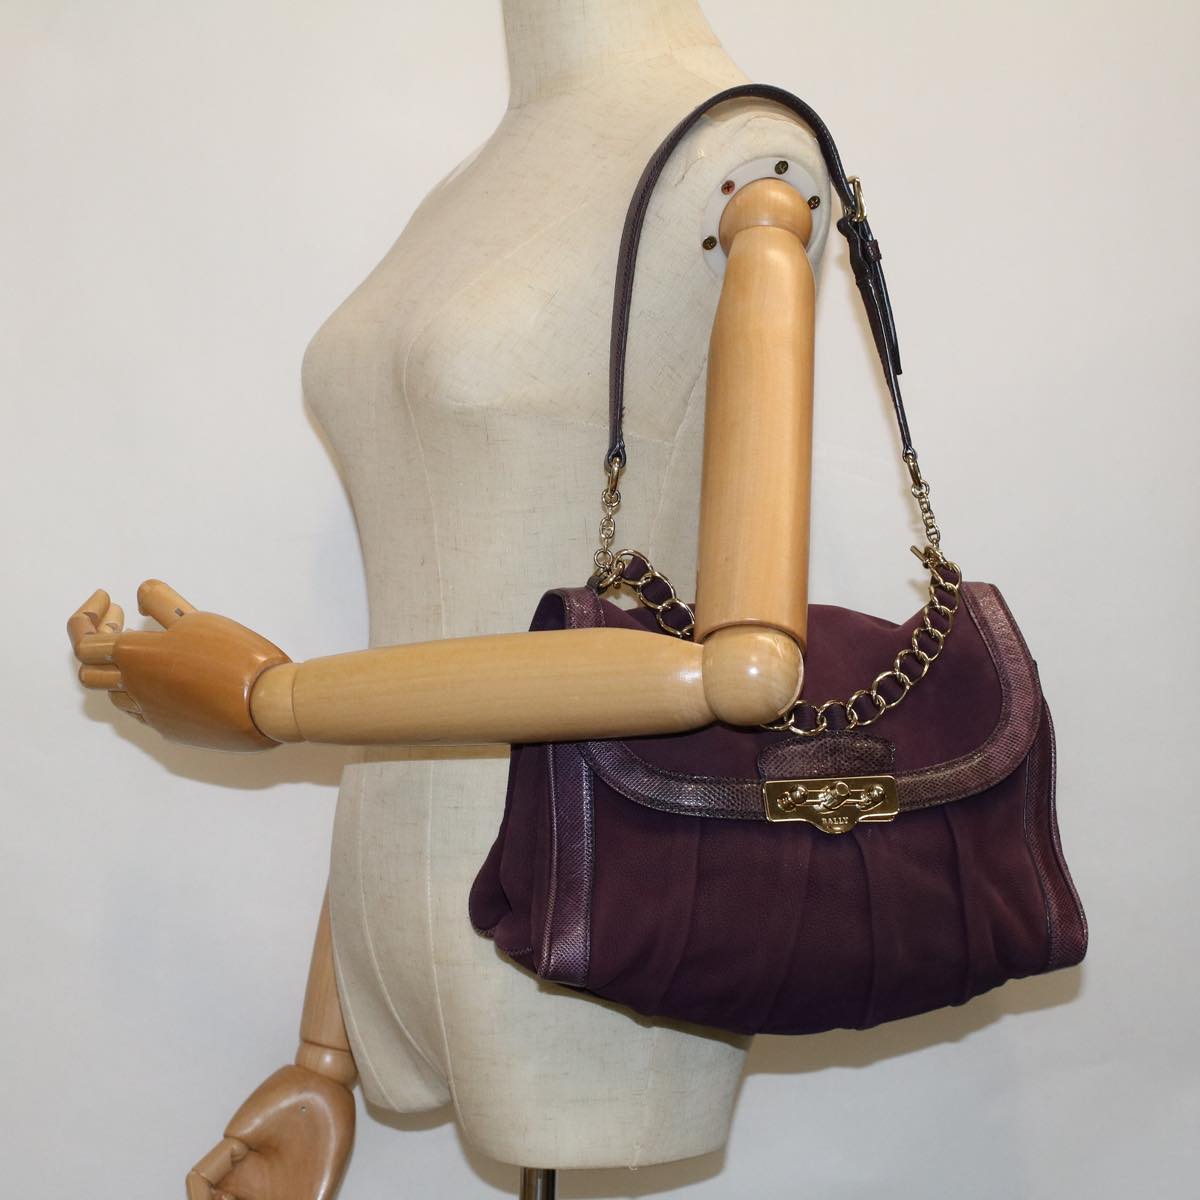 BALLY Chain Shoulder Bag Suede Purple Auth bs9078